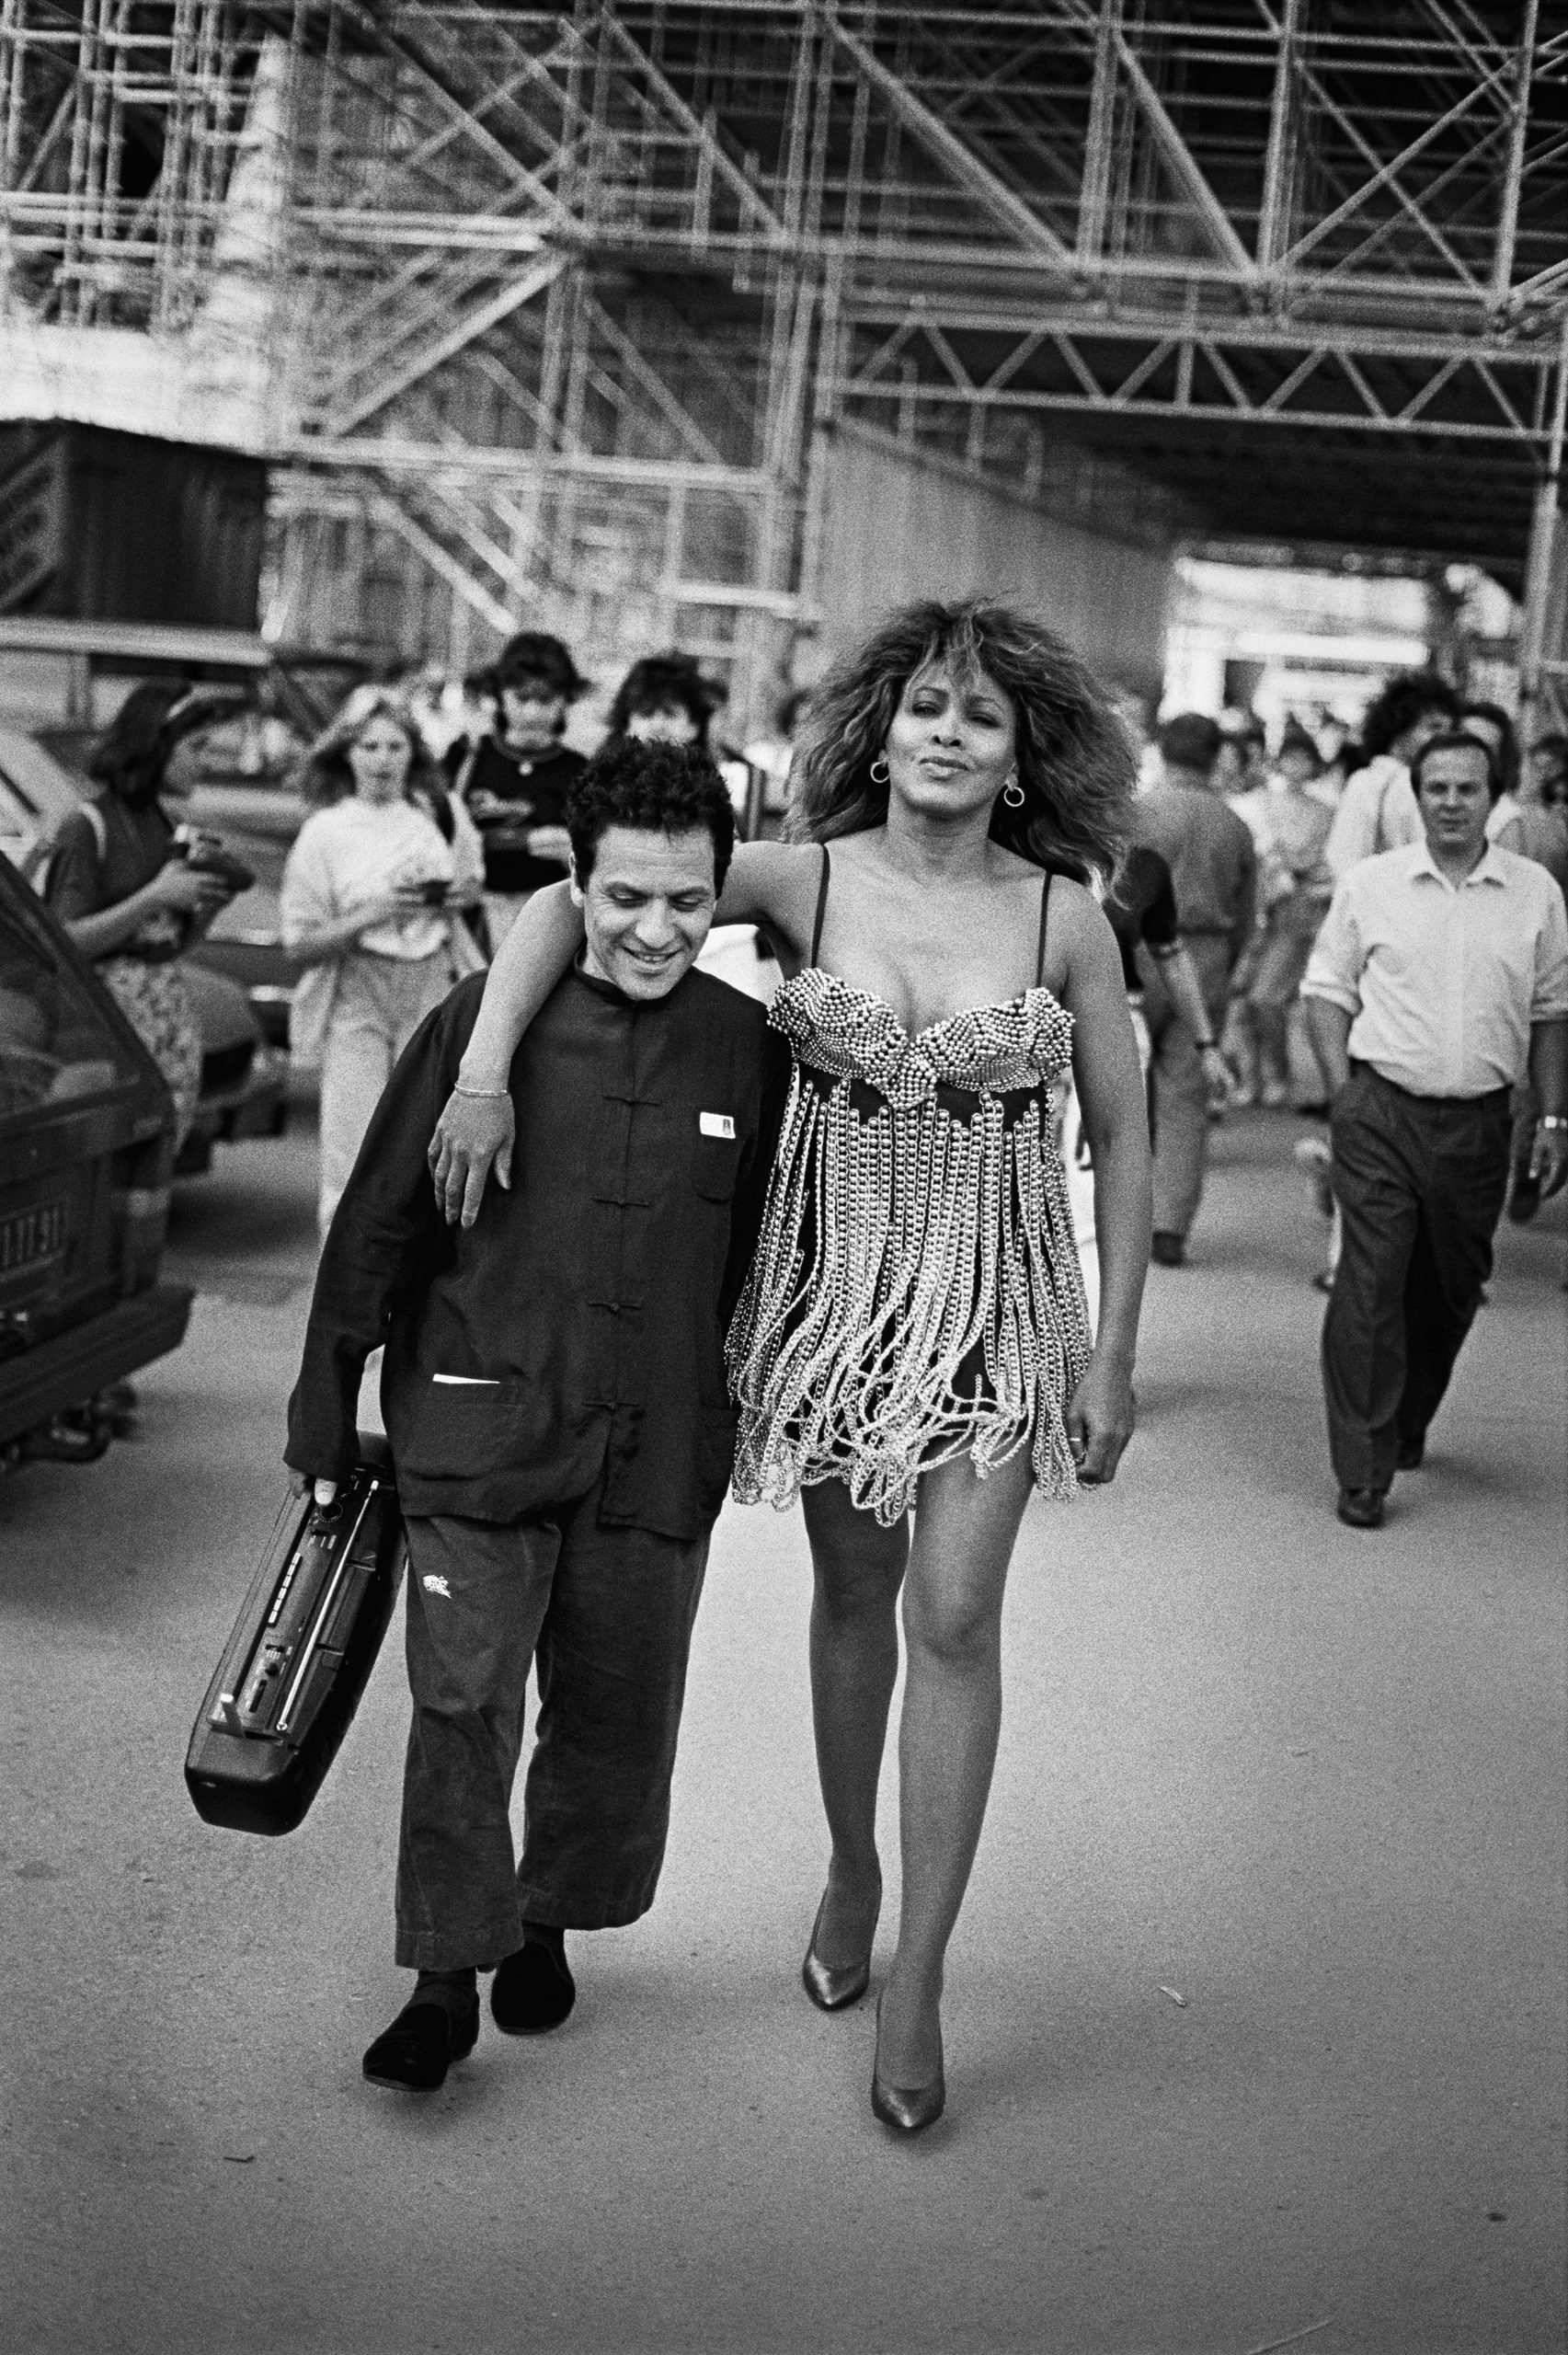 New Photography Exhibition Brings Azzedine Alaïa and Peter Lindbergh’s Legacies Together